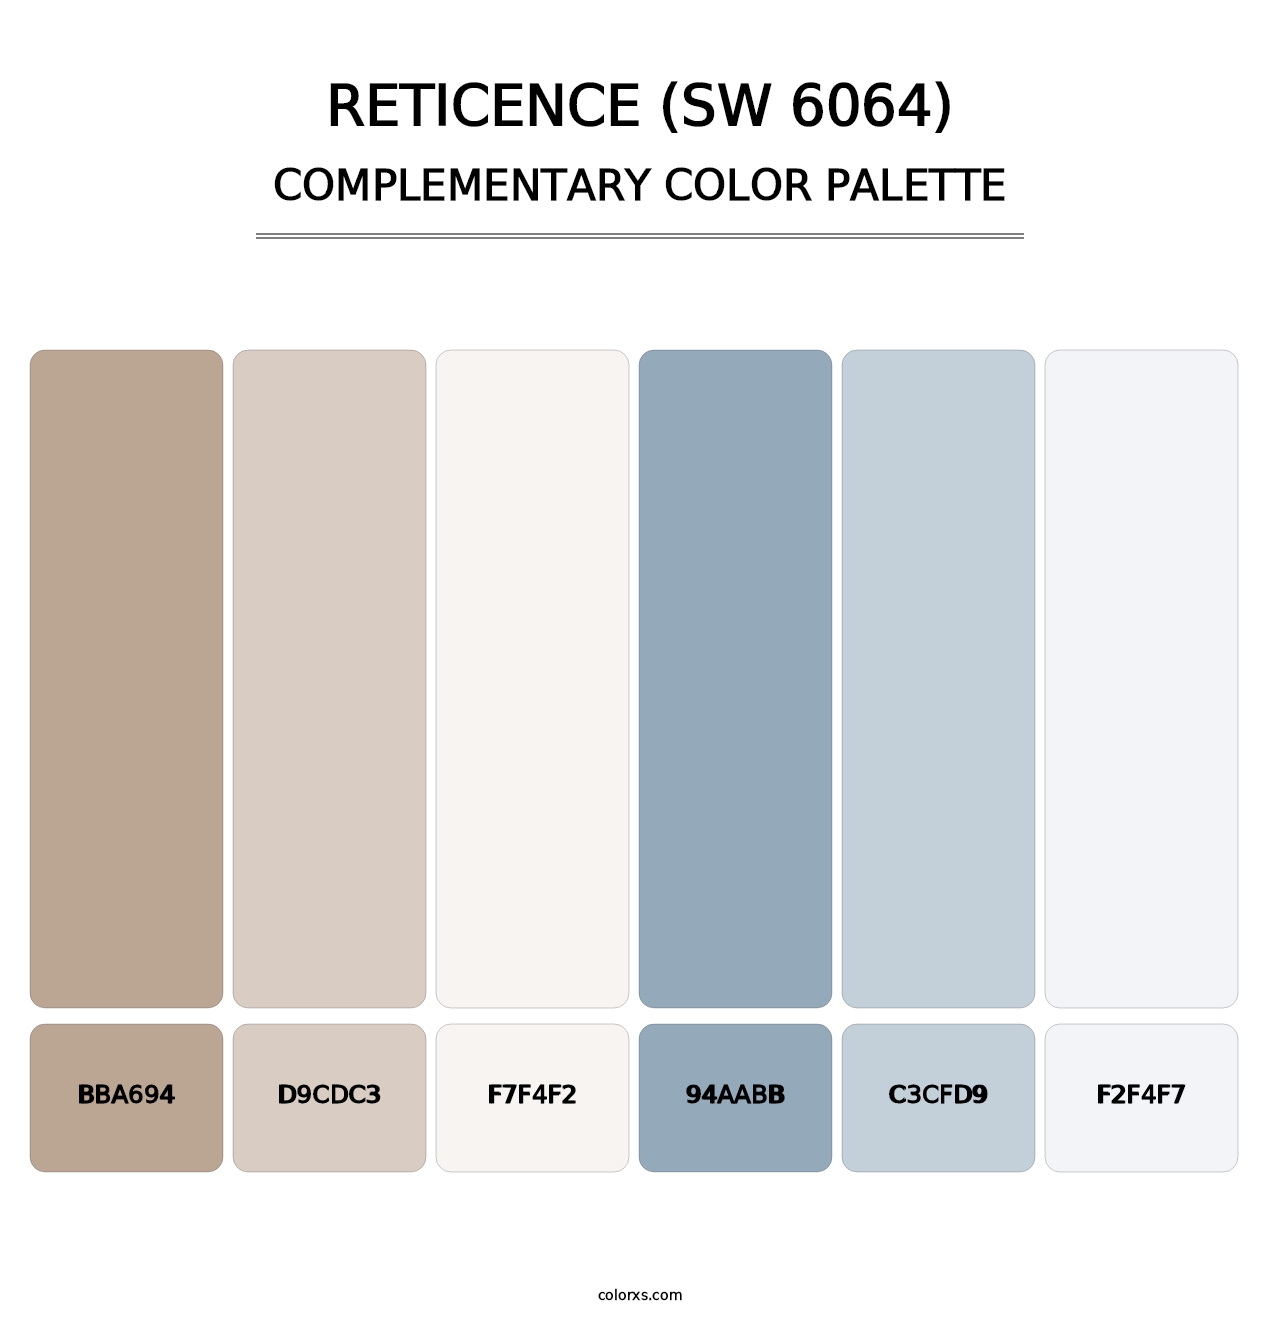 Reticence (SW 6064) - Complementary Color Palette